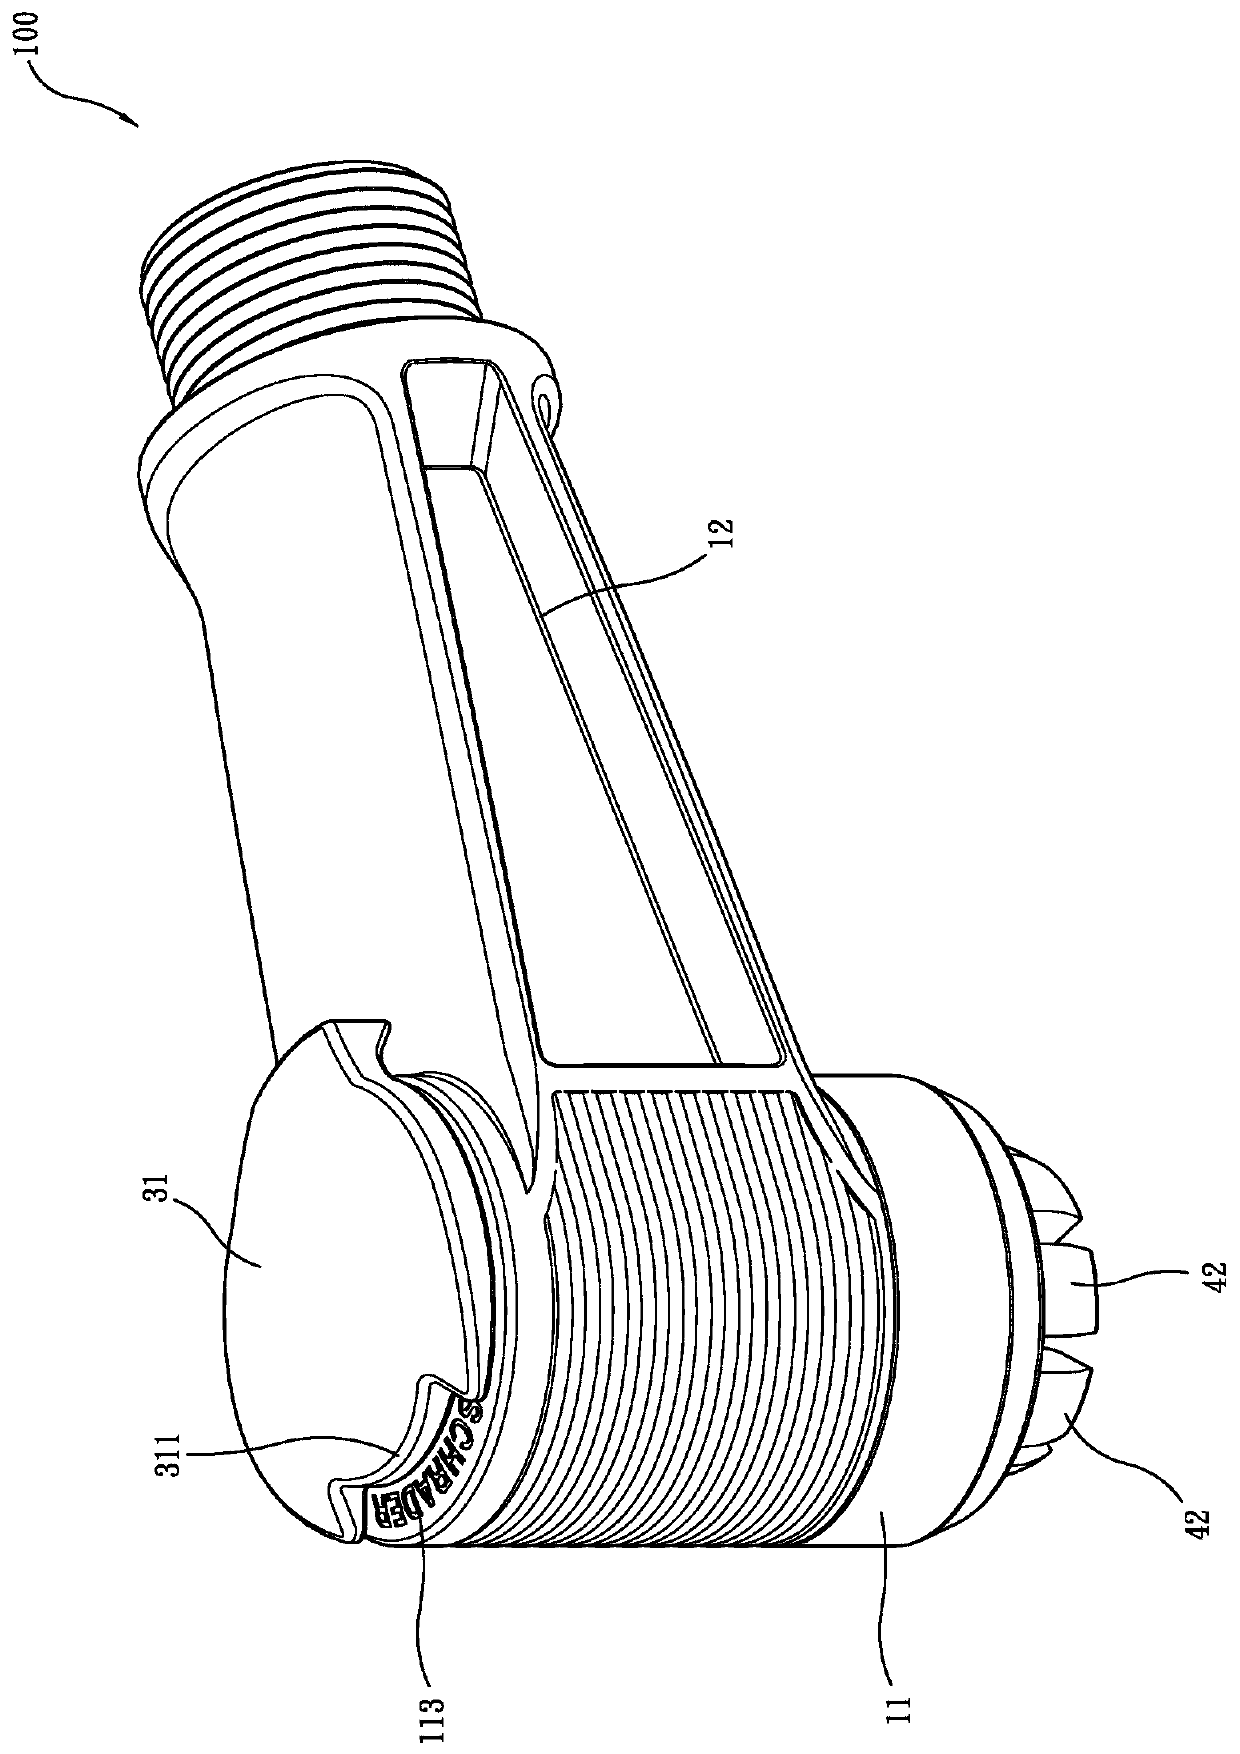 Rotary jaw type air nozzle